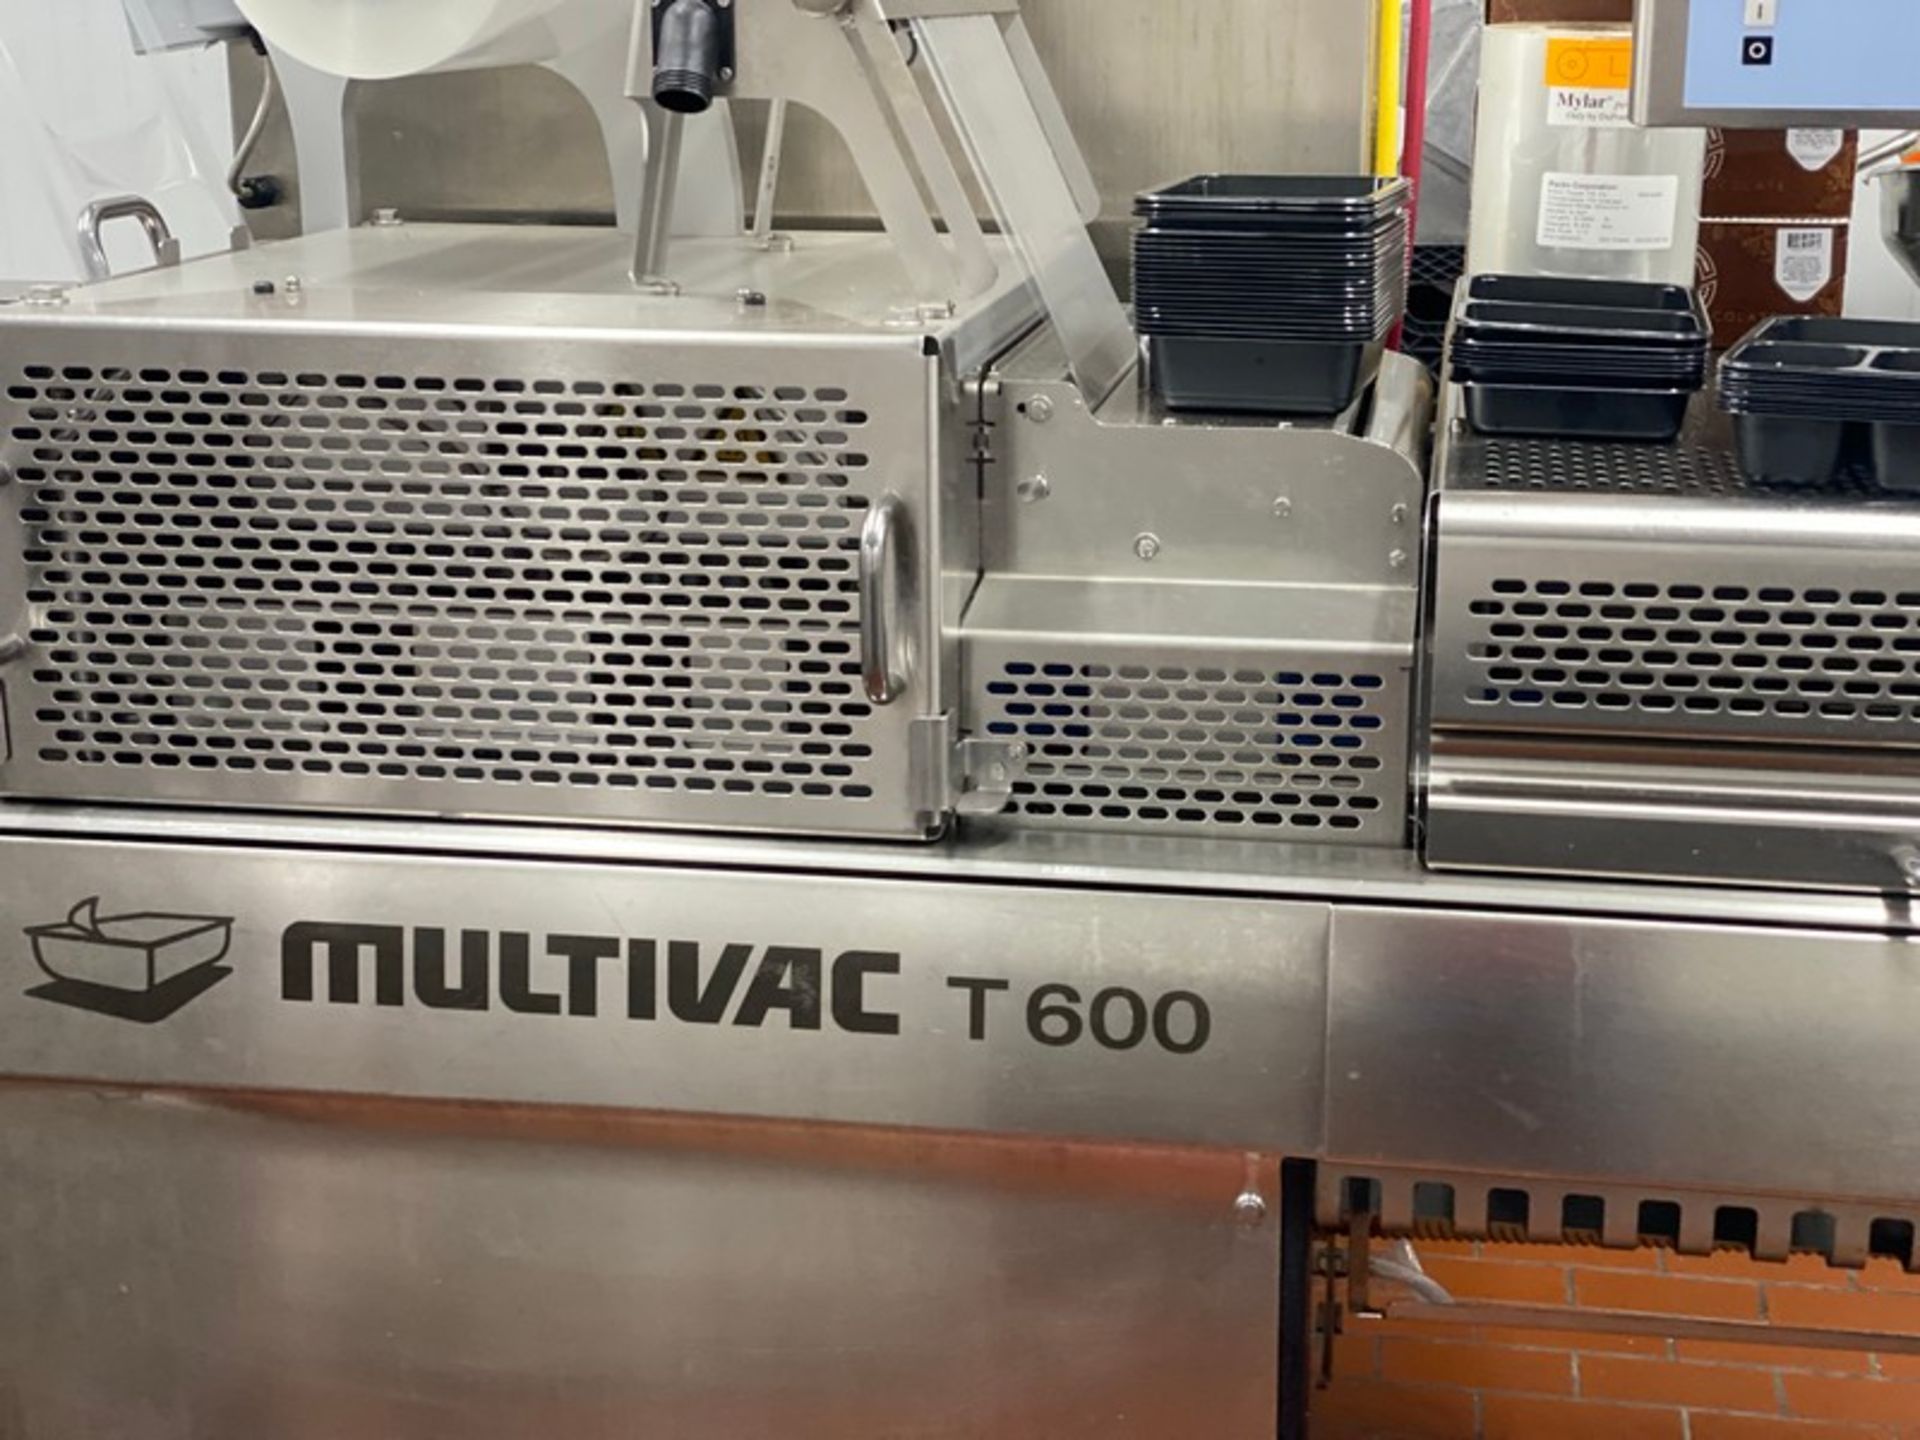 2014 Multivac Compact Automatic Traysealer, Model T600, S/N 196827, Designed for Rapid Product - Image 6 of 12